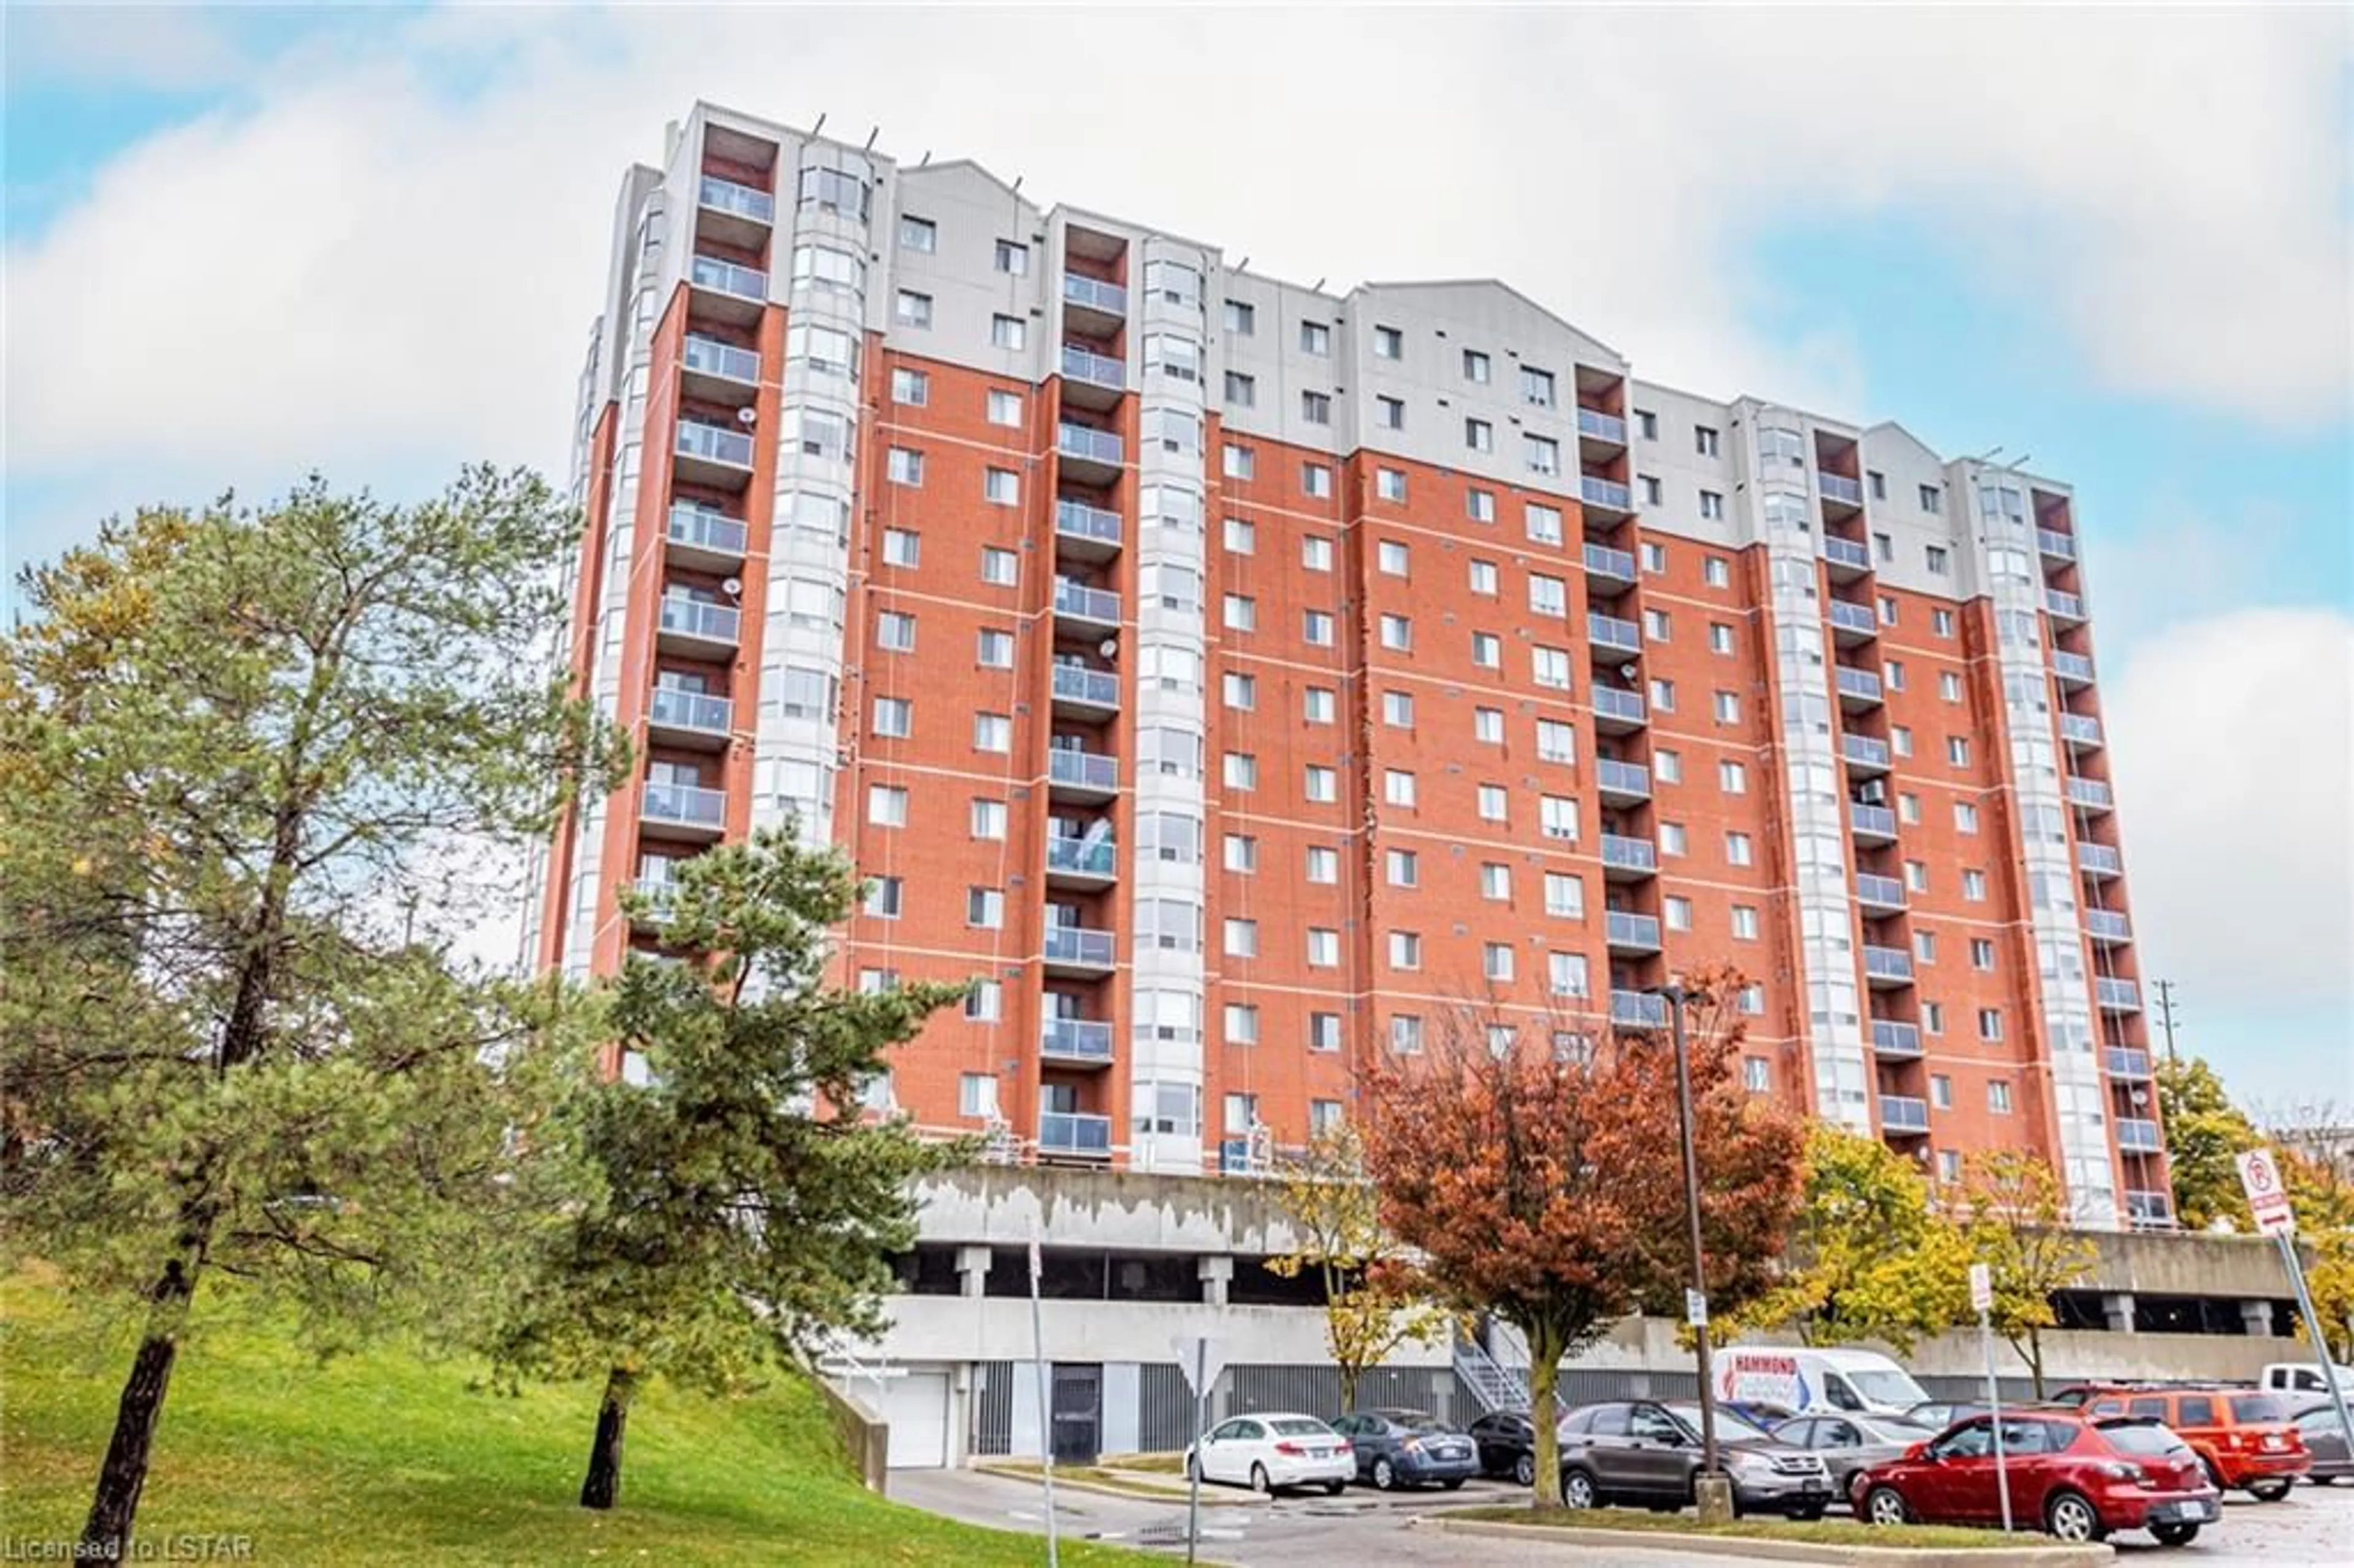 Balcony in the apartment for 30 Chapman Crt #1209, London Ontario N6G 4Y4